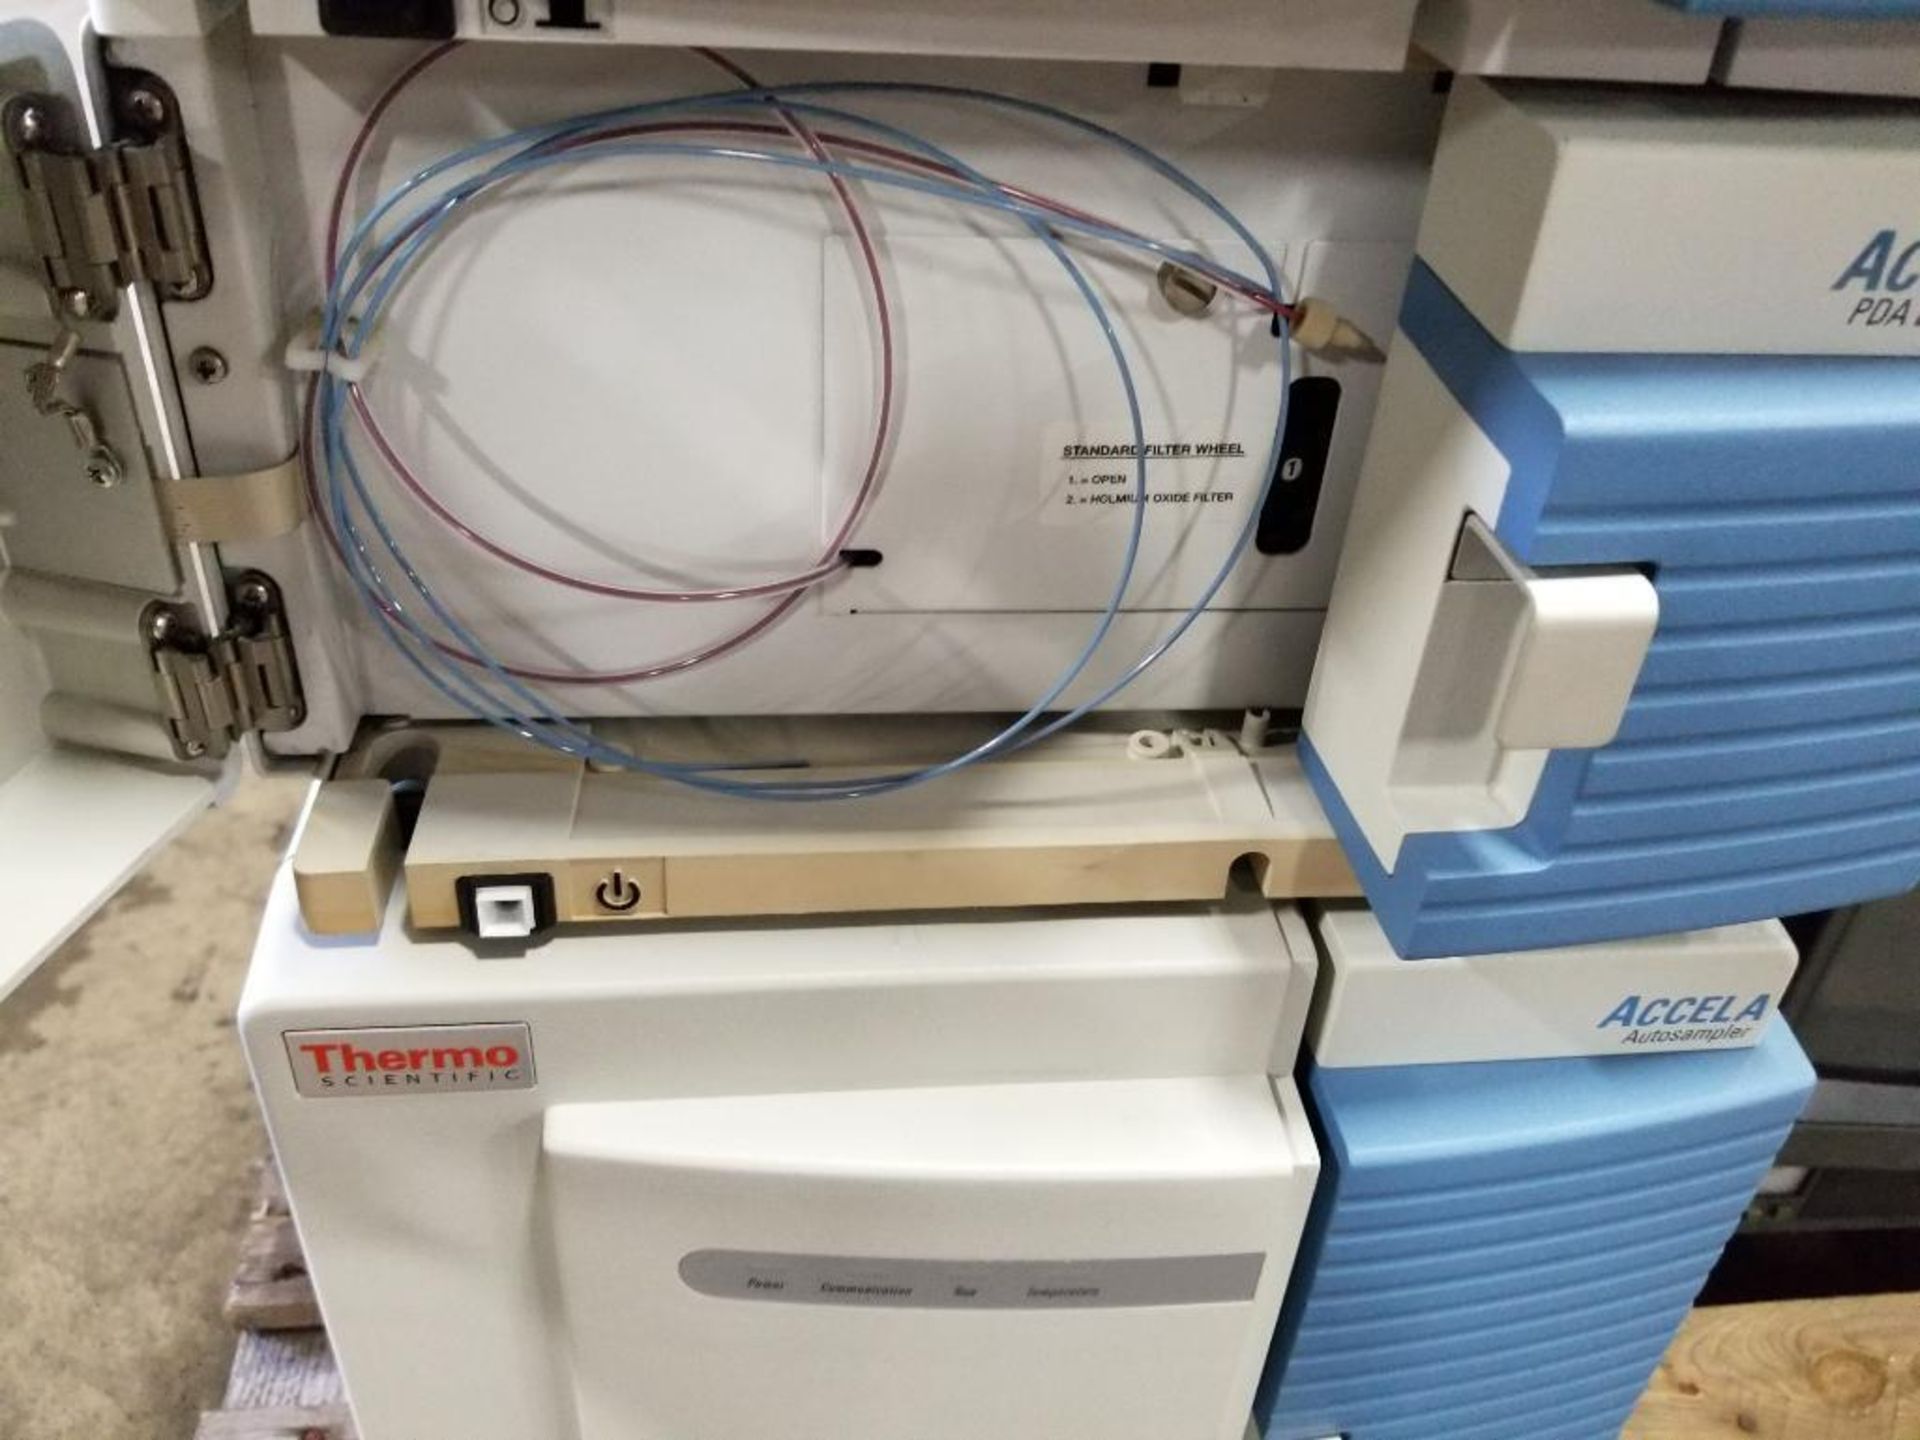 Thermo Fisher Scientific Accela HPLC spectrometer. - Image 6 of 14